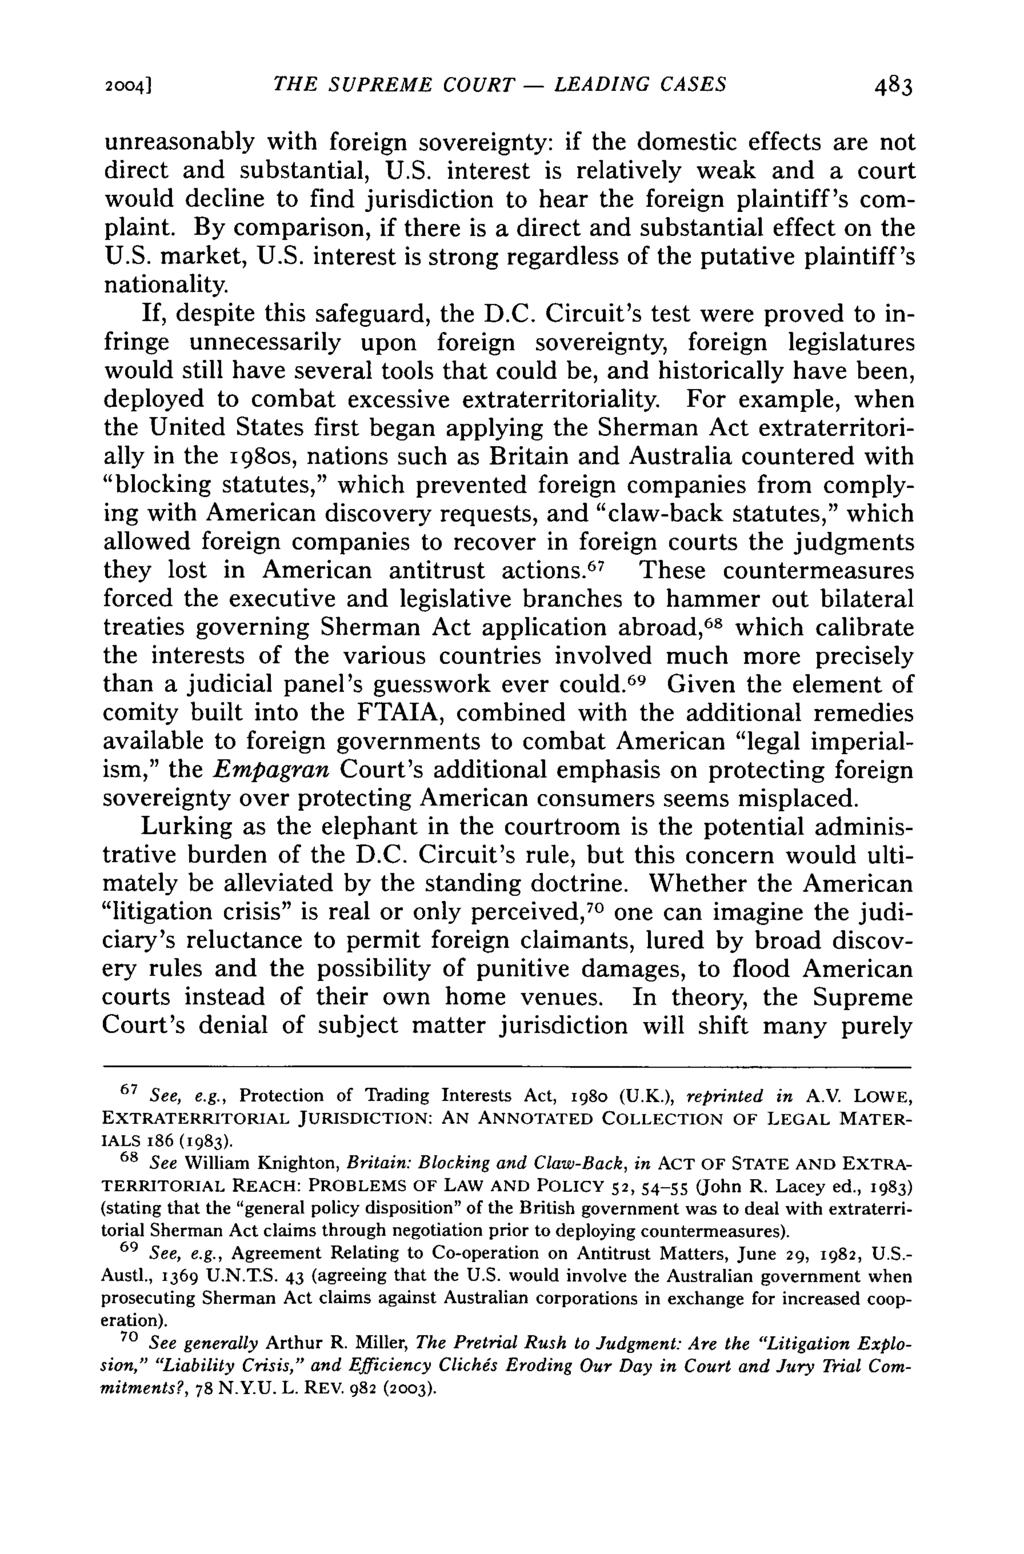 2004] THE SUPREME COURT - LEADING CASES unreasonably with foreign sovereignty: if the domestic effects are not direct and substantial, U.S. interest is relatively weak and a court would decline to find jurisdiction to hear the foreign plaintiff's complaint.